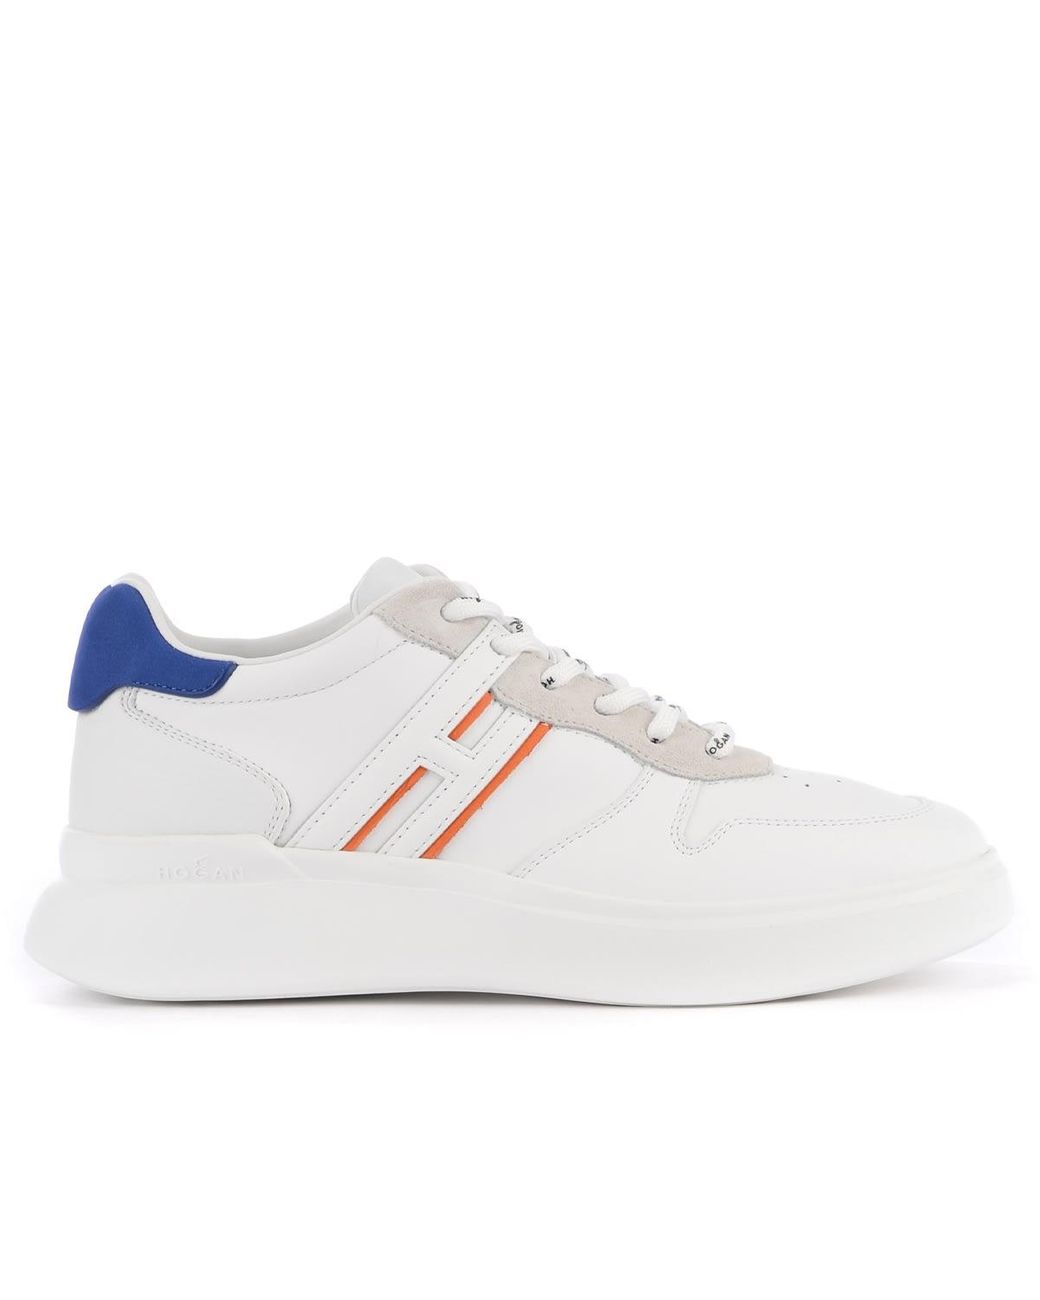 Hogan H580 Sneaker In White Blue And Brick Color Leather for Men | Lyst